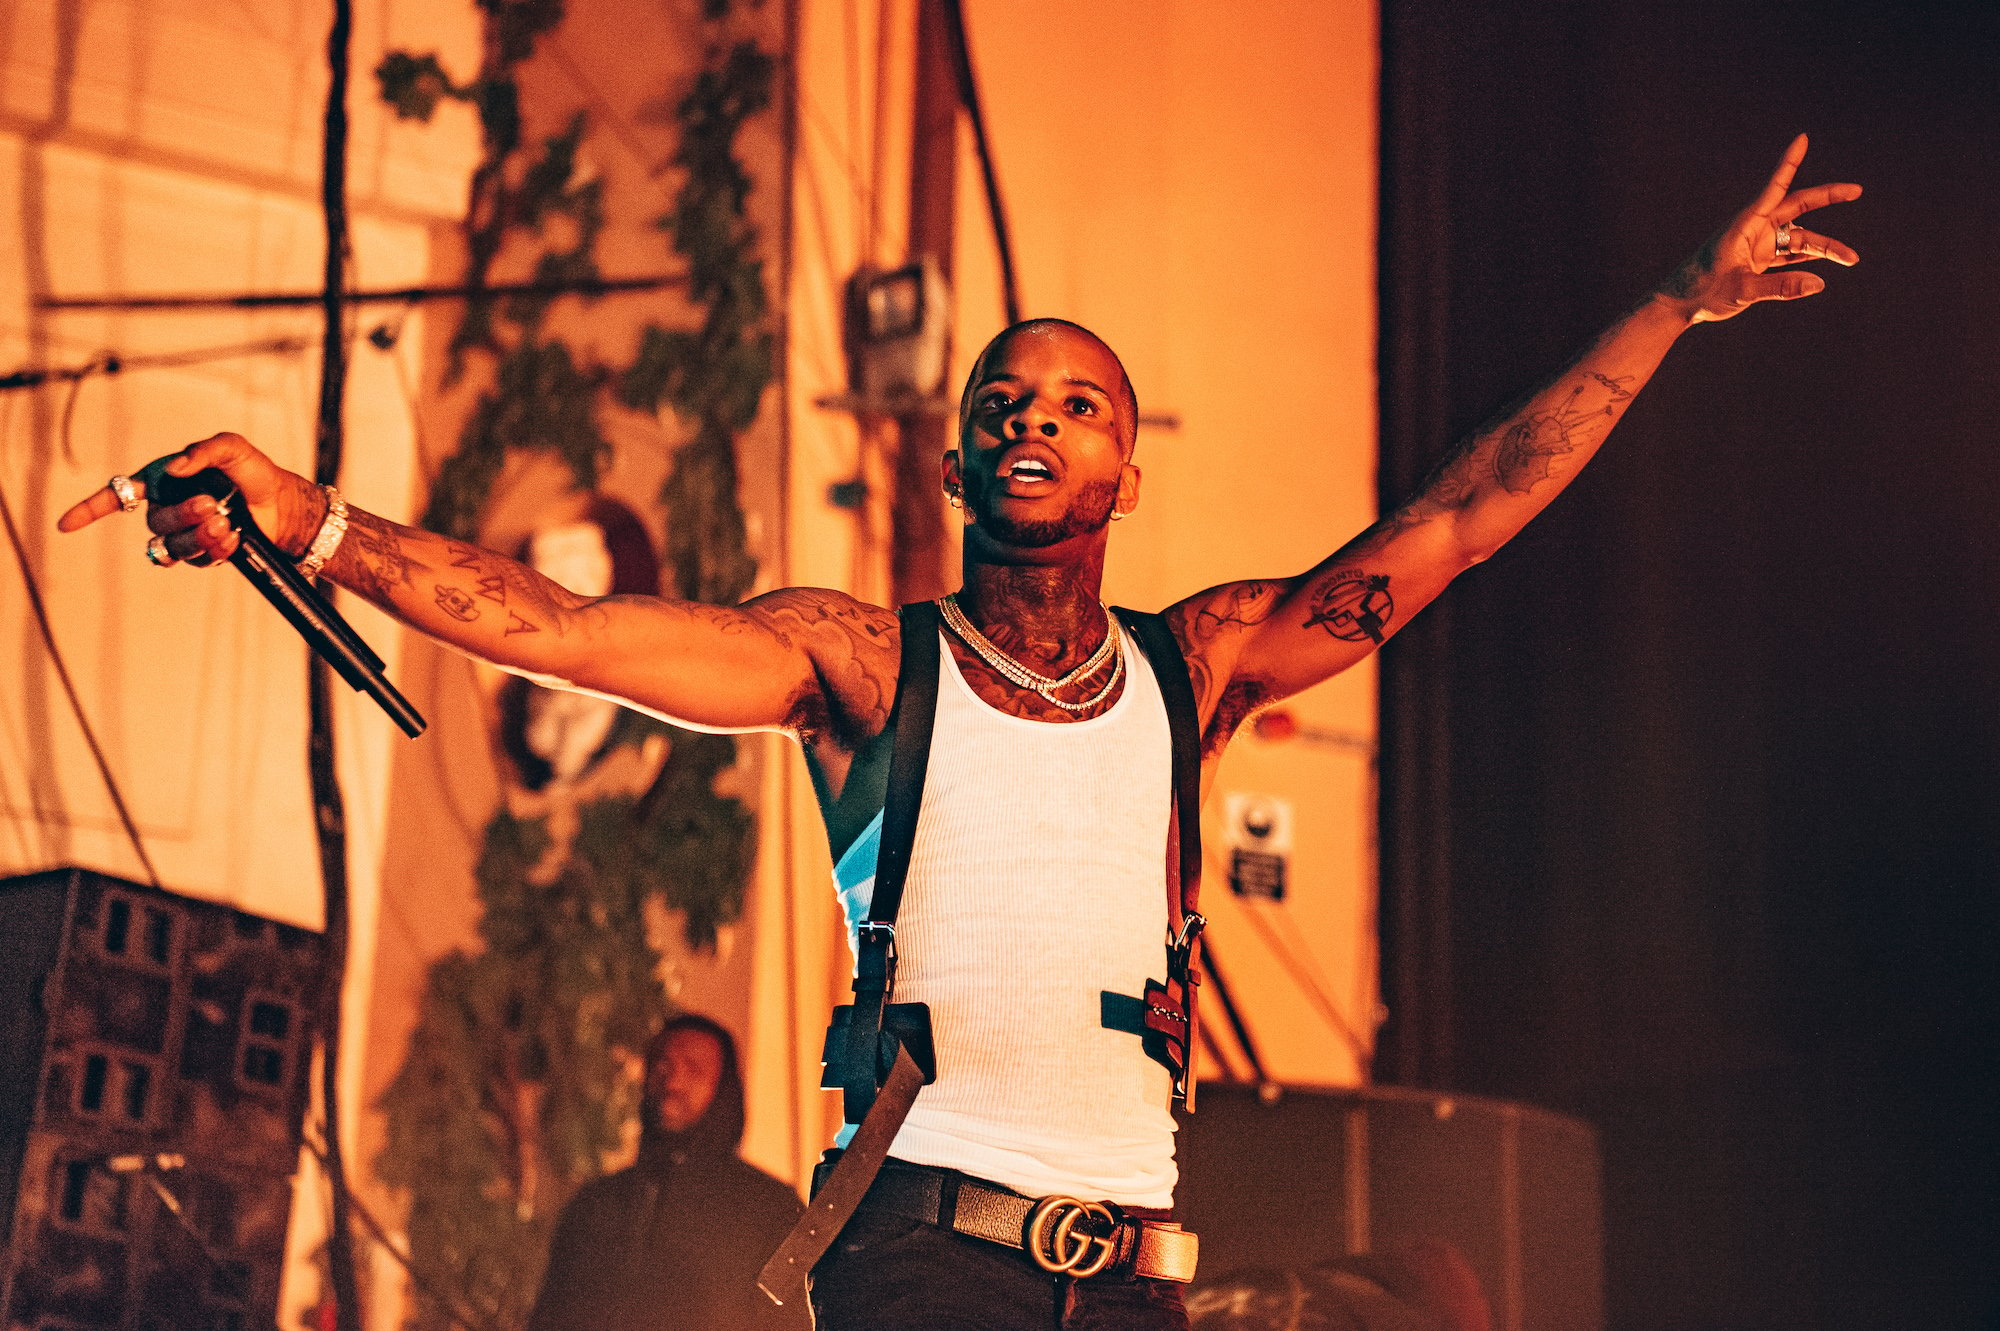 Tory Lanez on stage with his arms outstretched